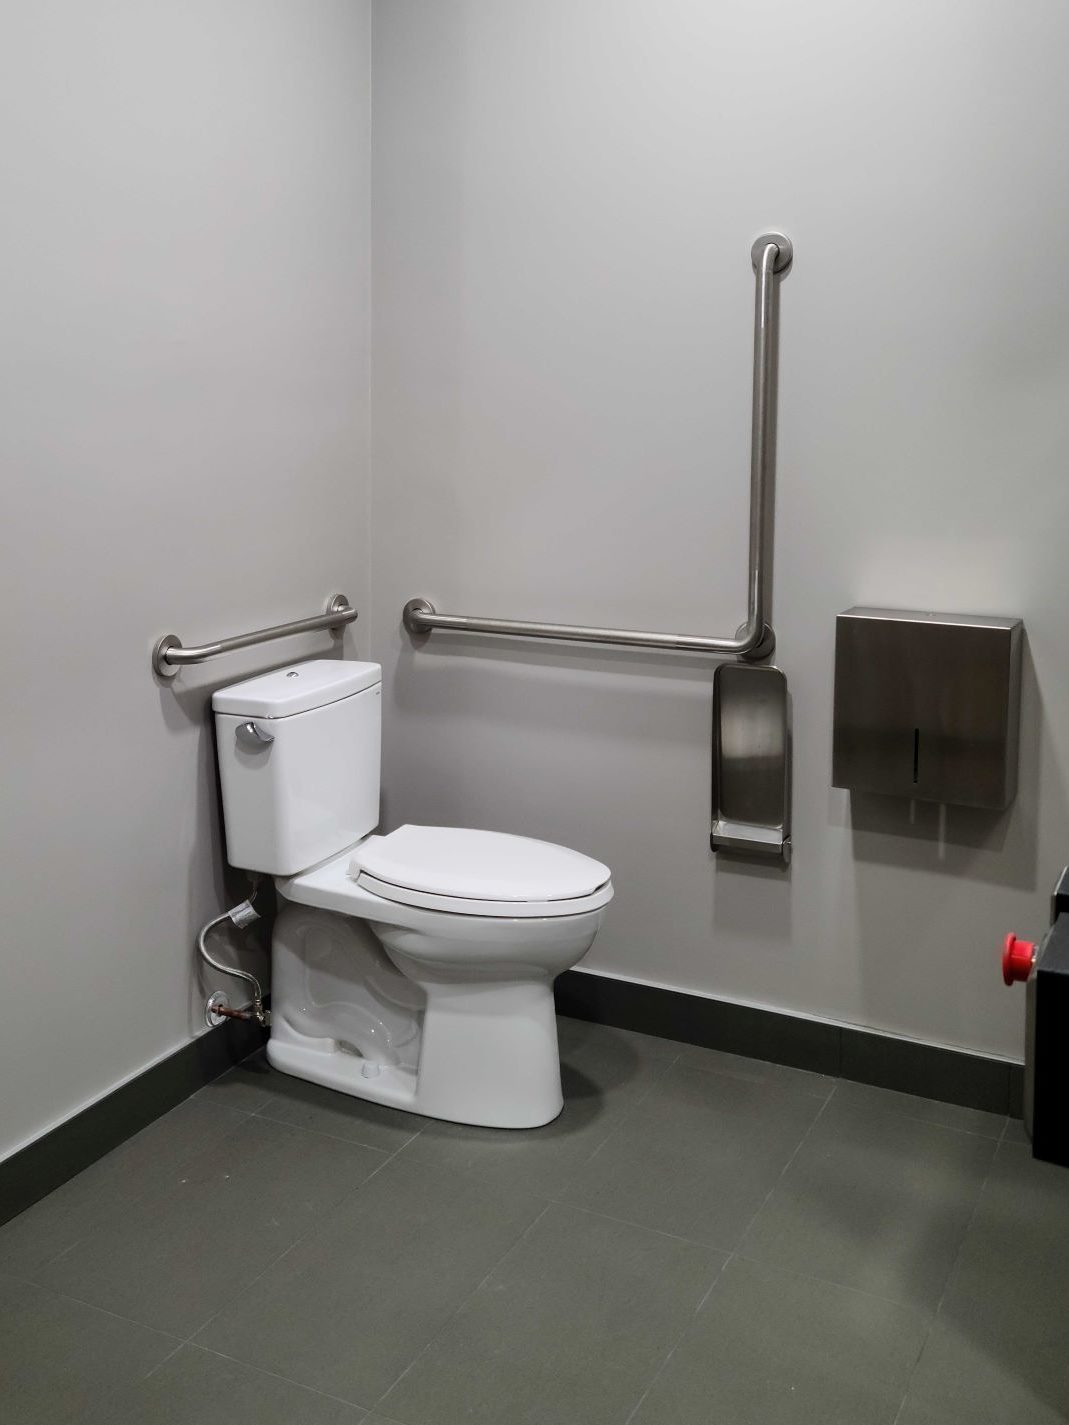 Restroom toilet with large adjacent space, horizontal and vertical grab bars, toilet paper dispenser, and collapsible wall shelf